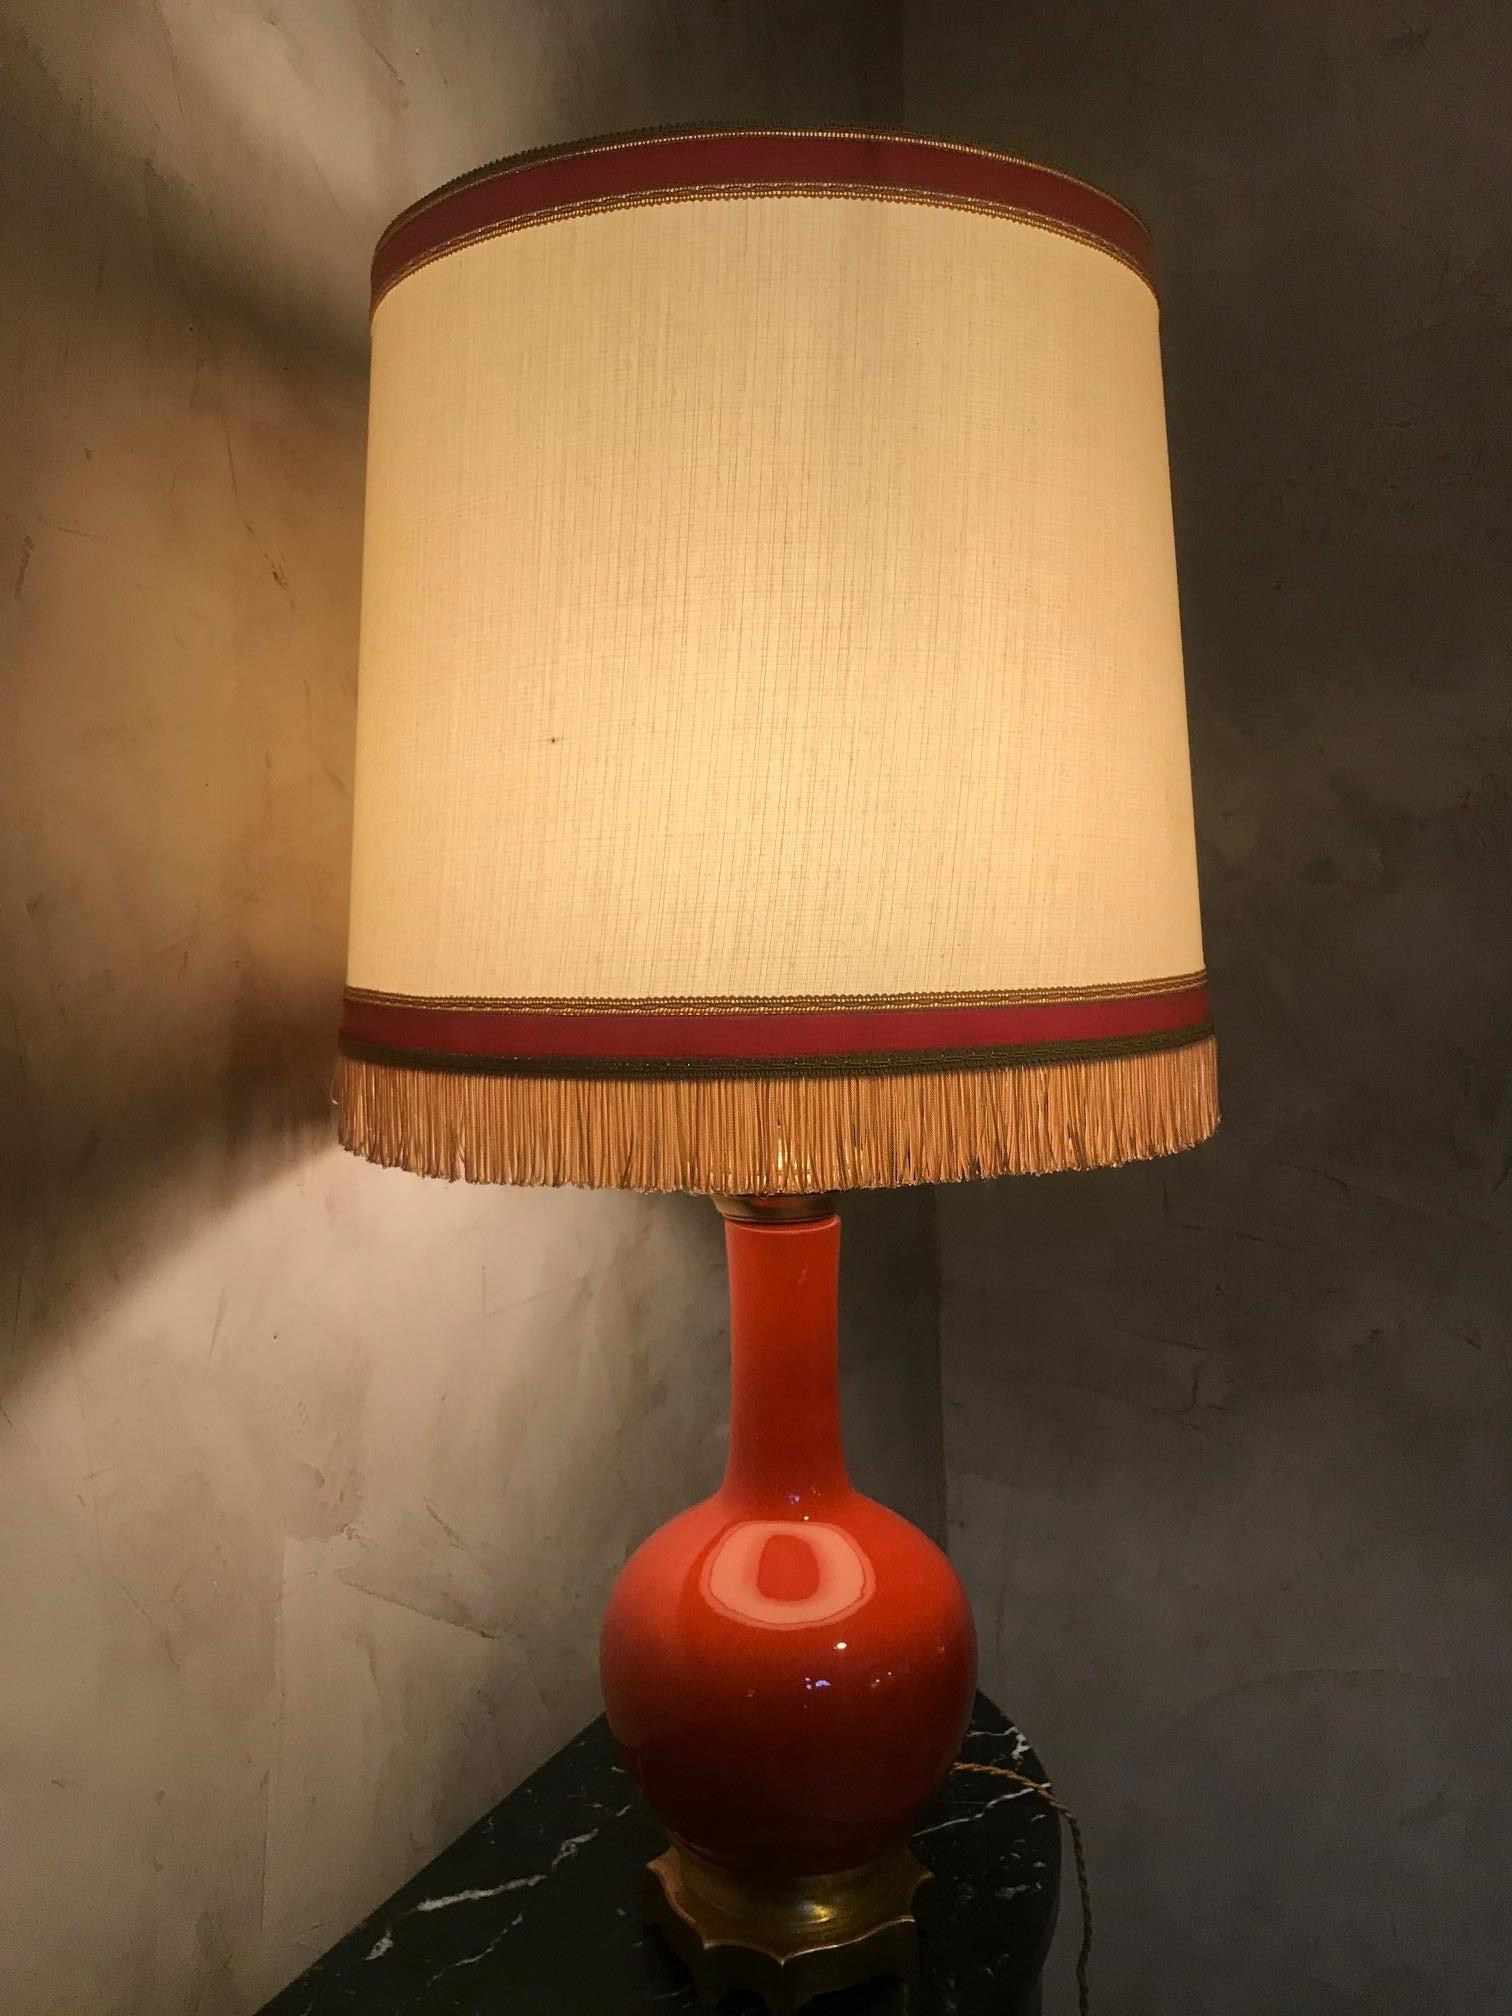 20th Century French Orange Opaline Glass and Brass Table Lamp, 1920s For Sale 1